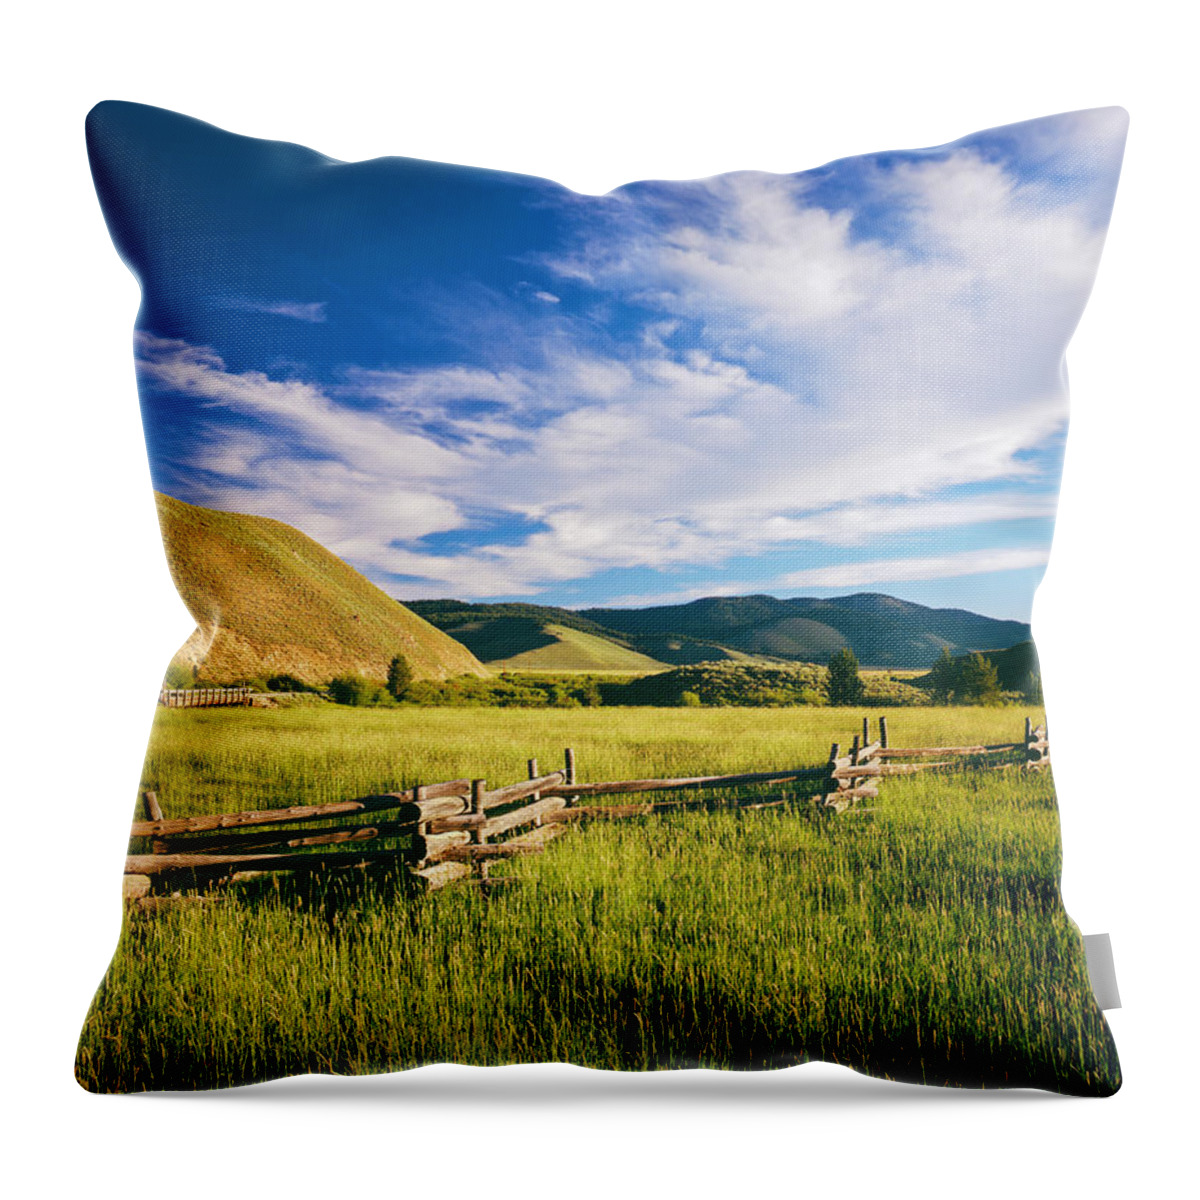 Scenics Throw Pillow featuring the photograph Idaho Country Side by Ron thomas